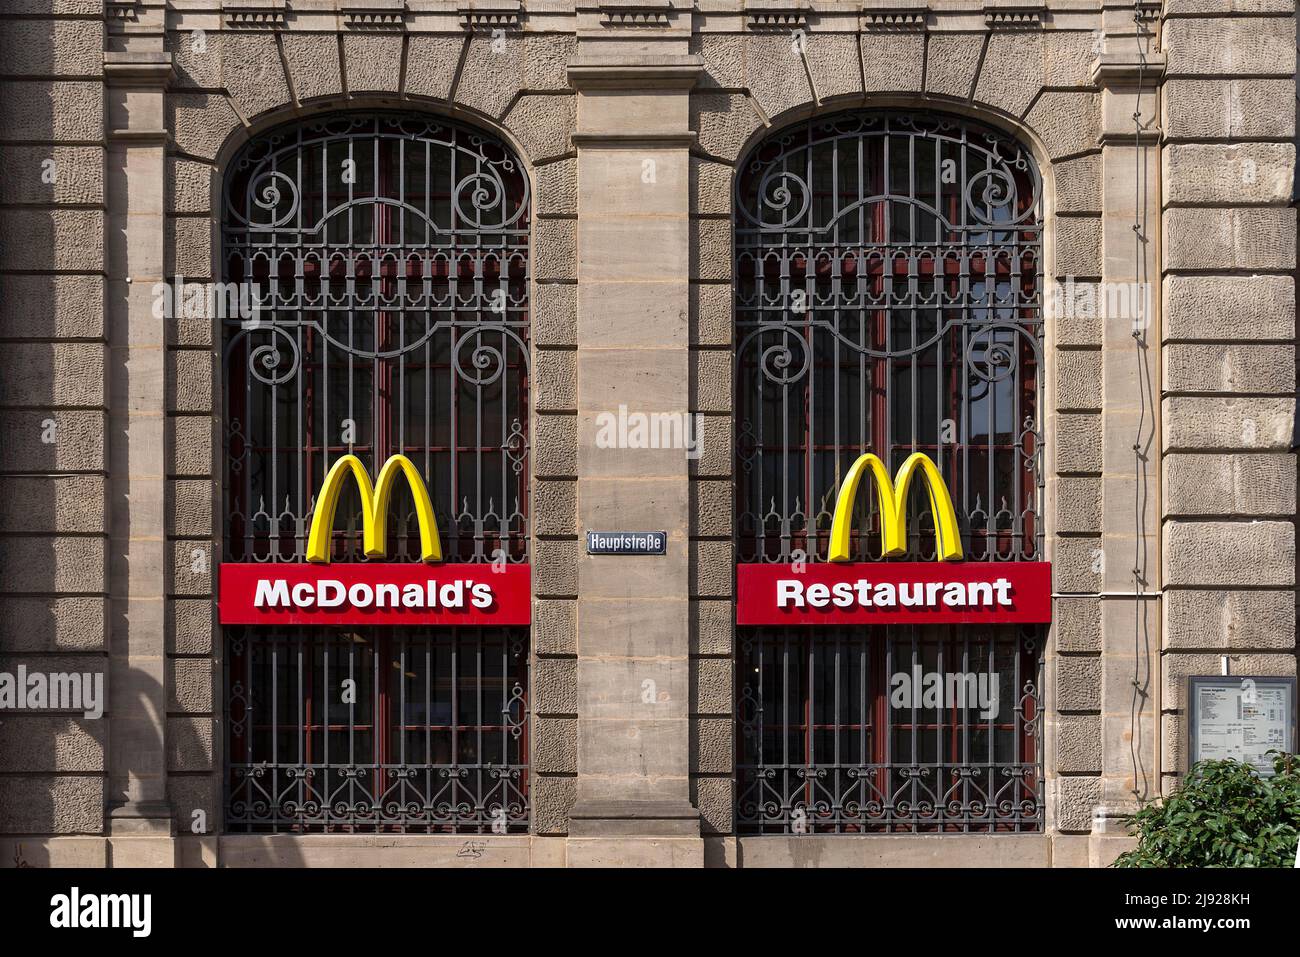 Mc Donald logos on the windows of a historic post office building, Erlangen, Middle Franconia Bavaria, Germany Stock Photo